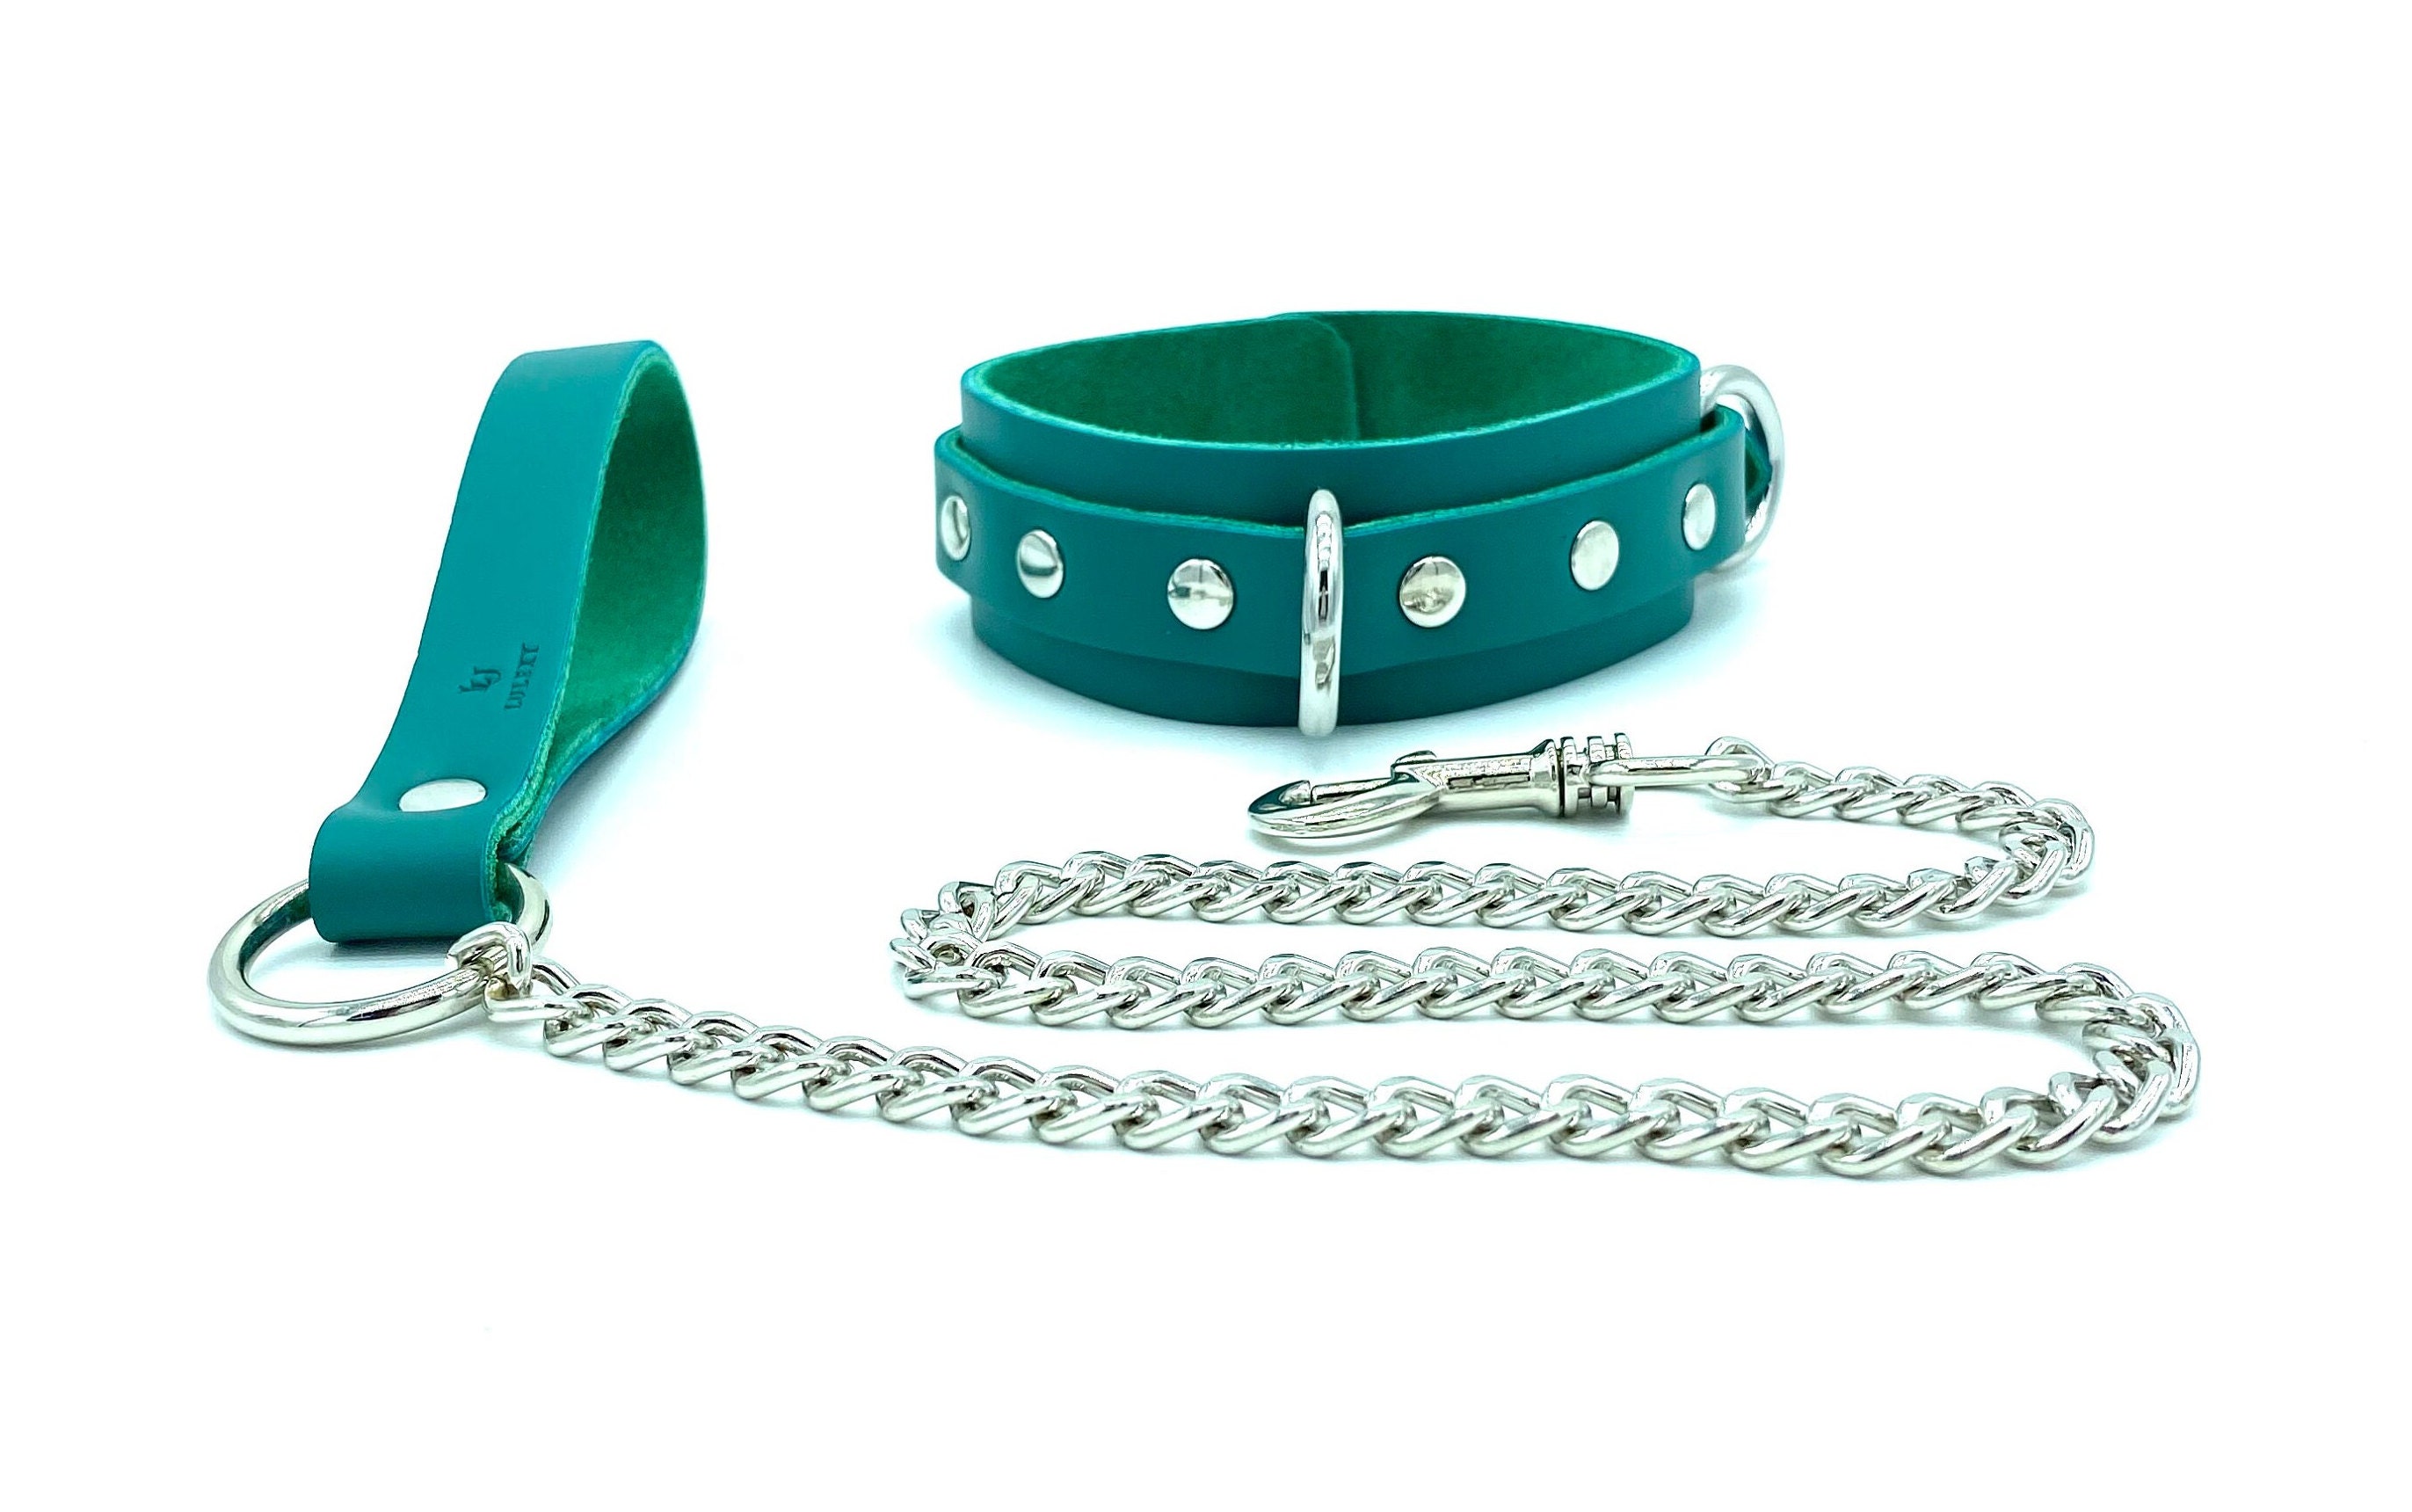 7 Piece Bondage Kit "Candice", Teal Green Leather BDSM Restraints, Wrist and Ankle Cuffs, Thigh Cuffs, Collar, Chain Leash photo